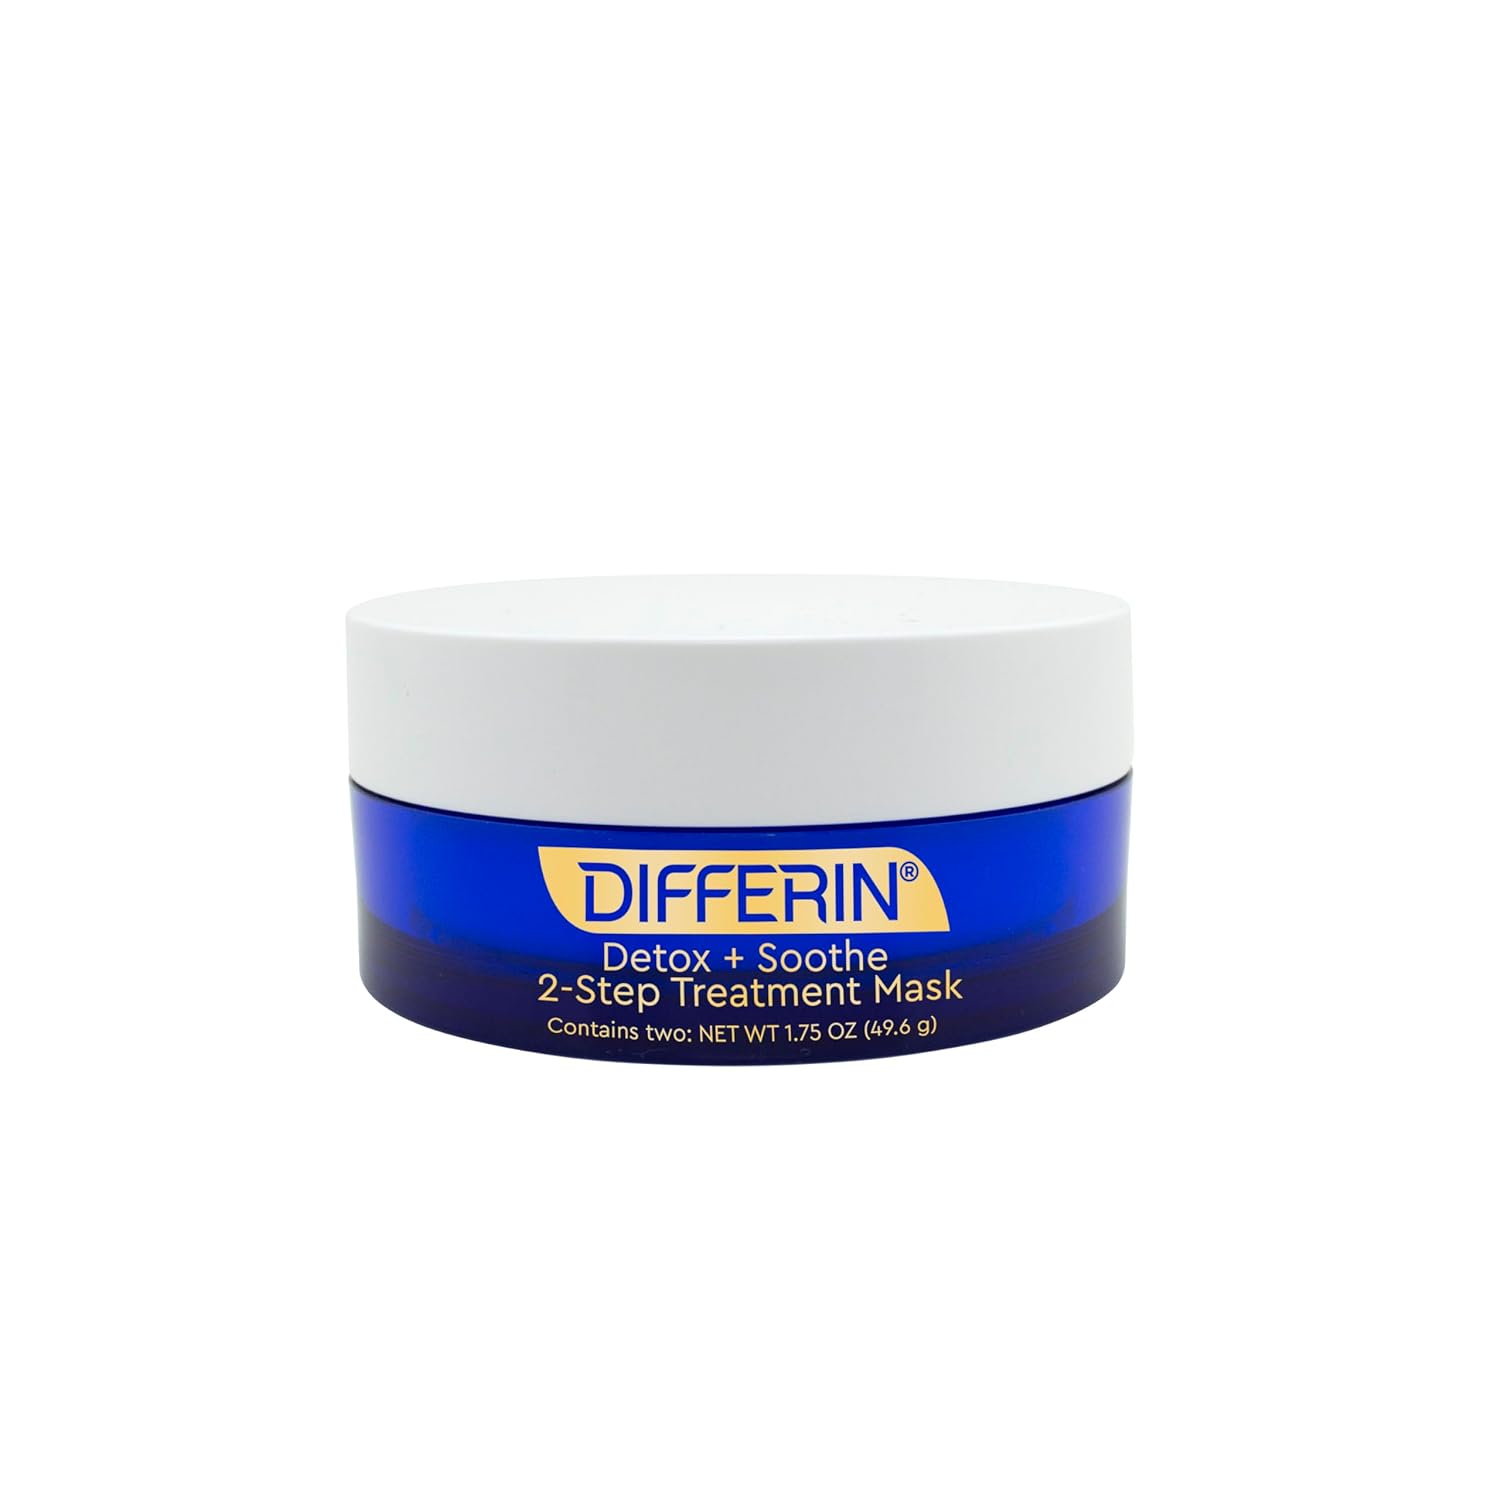 Differin Clay Face Mask